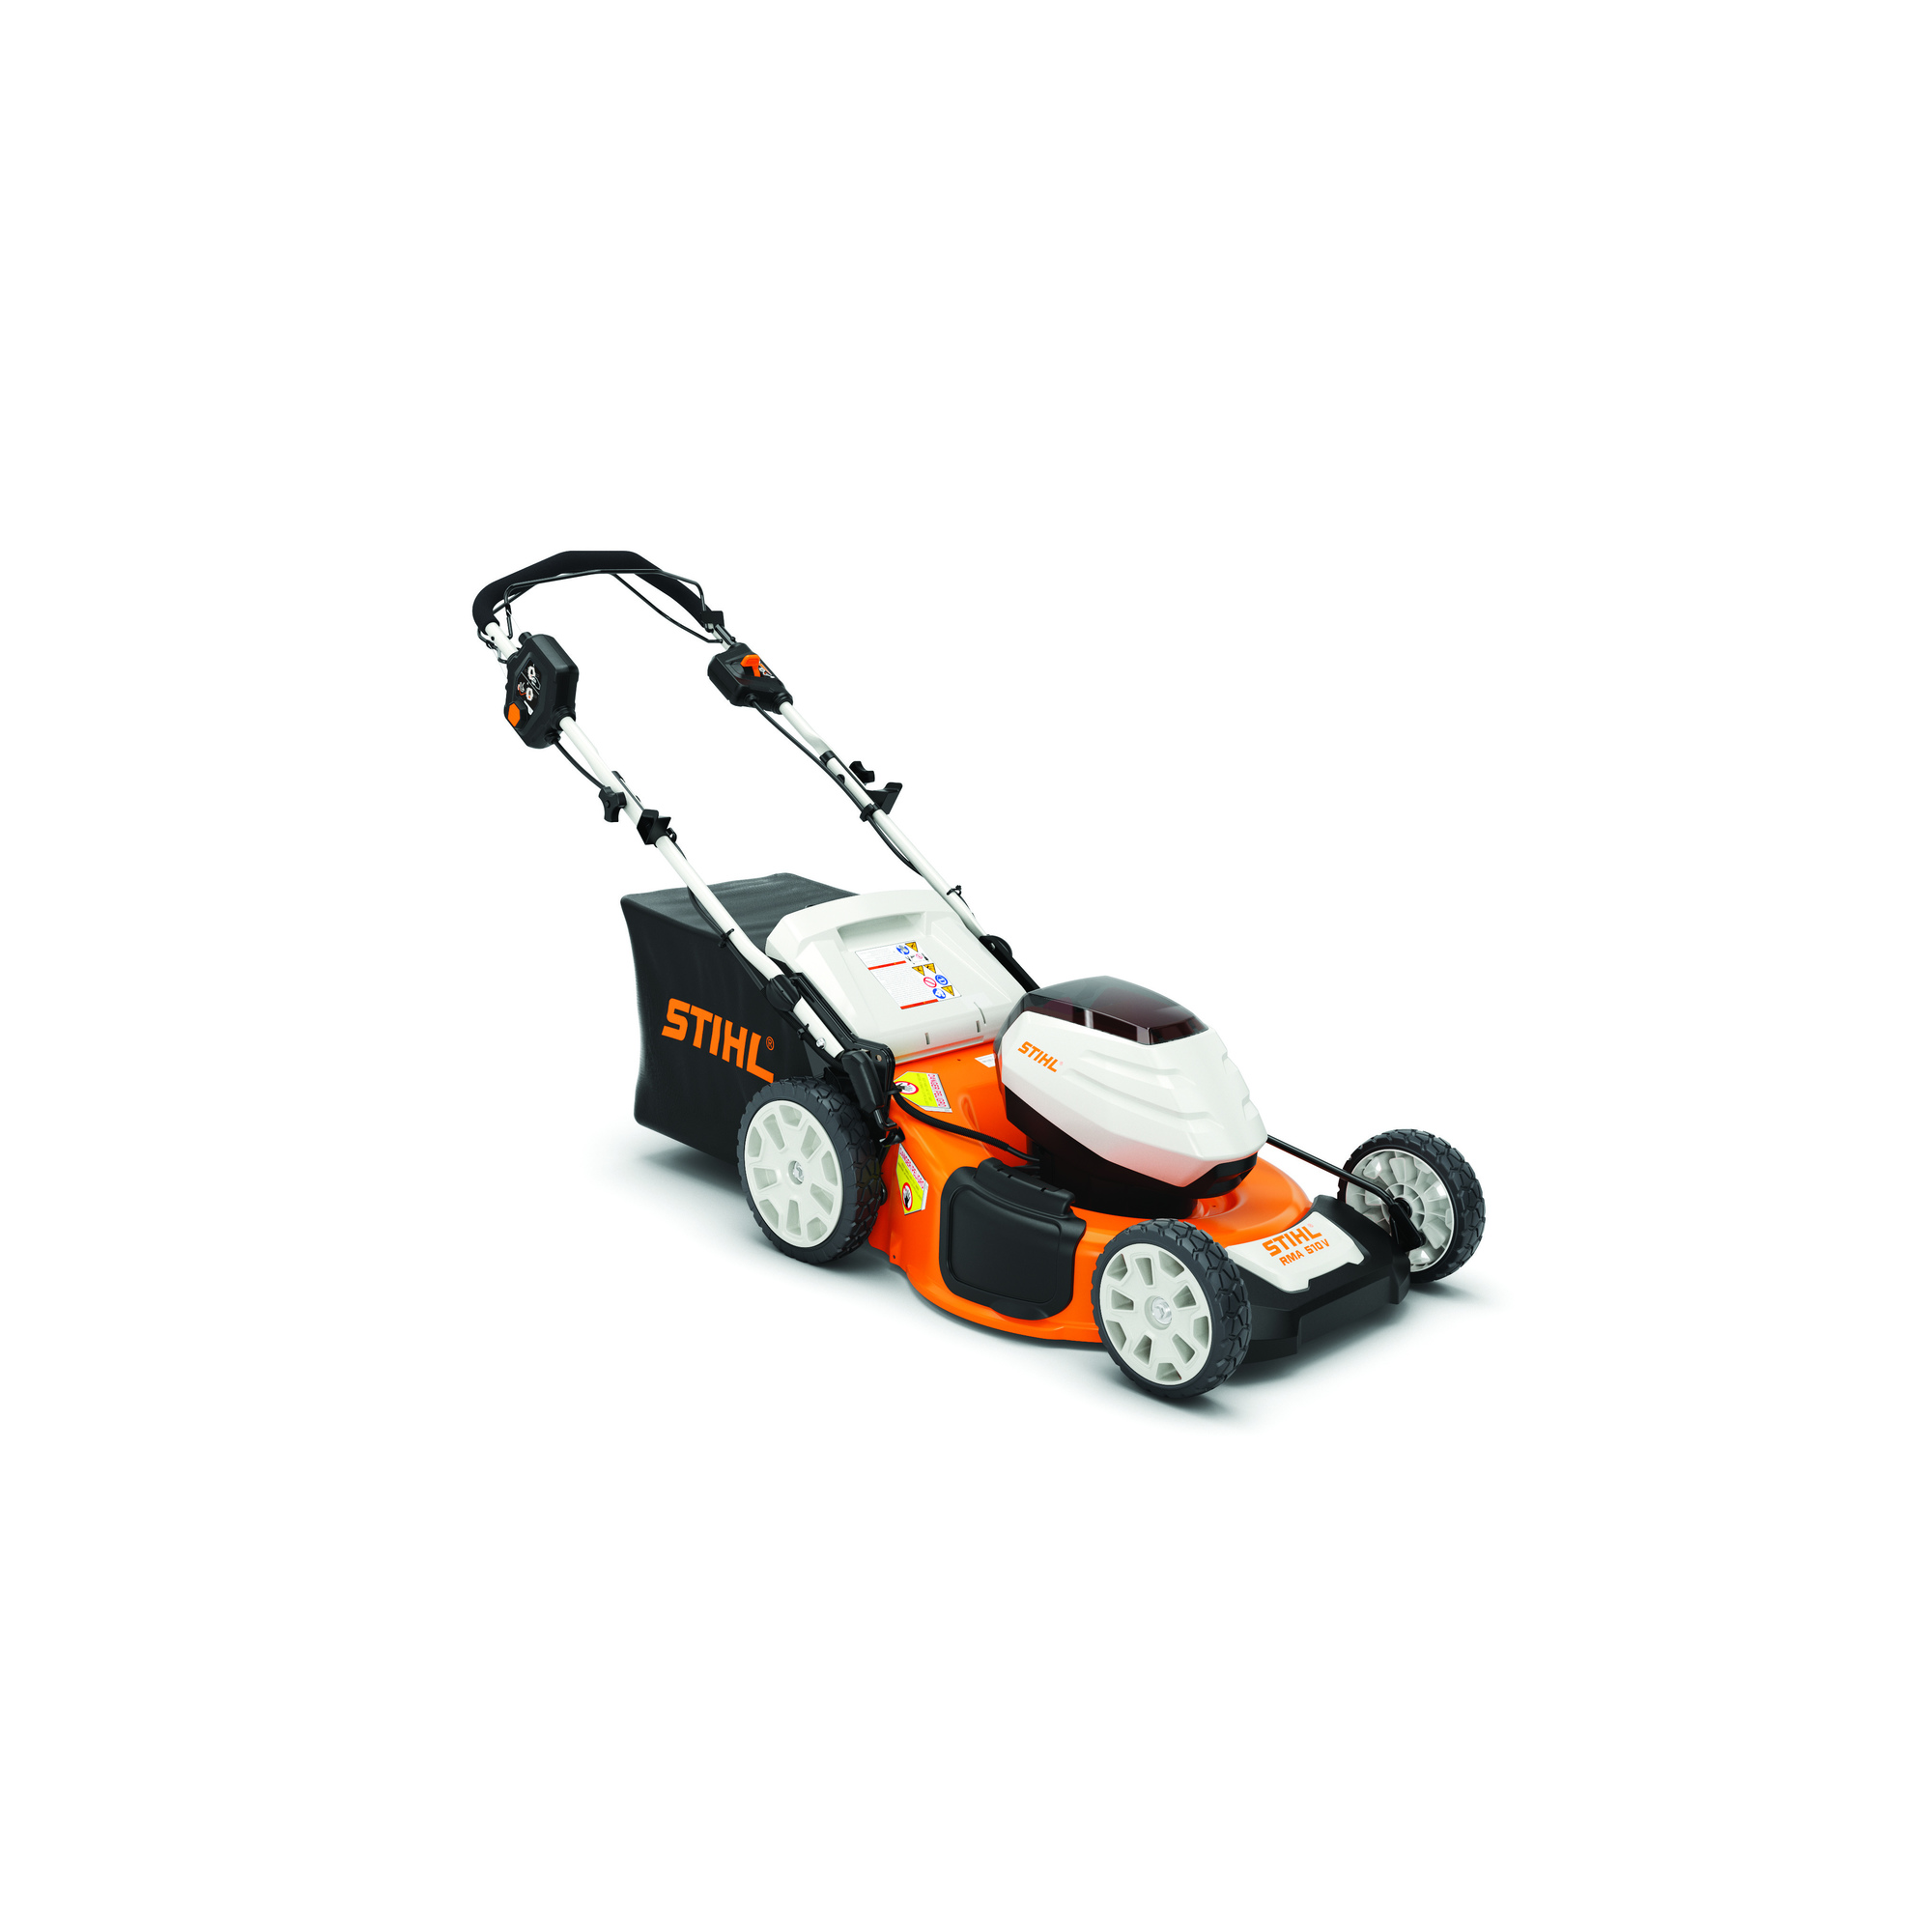 Stihl, Lithium-Ion Self-Propelled Lawn Mower, Cutting Width 21 in, Power Source Battery, Model RMA 510 V